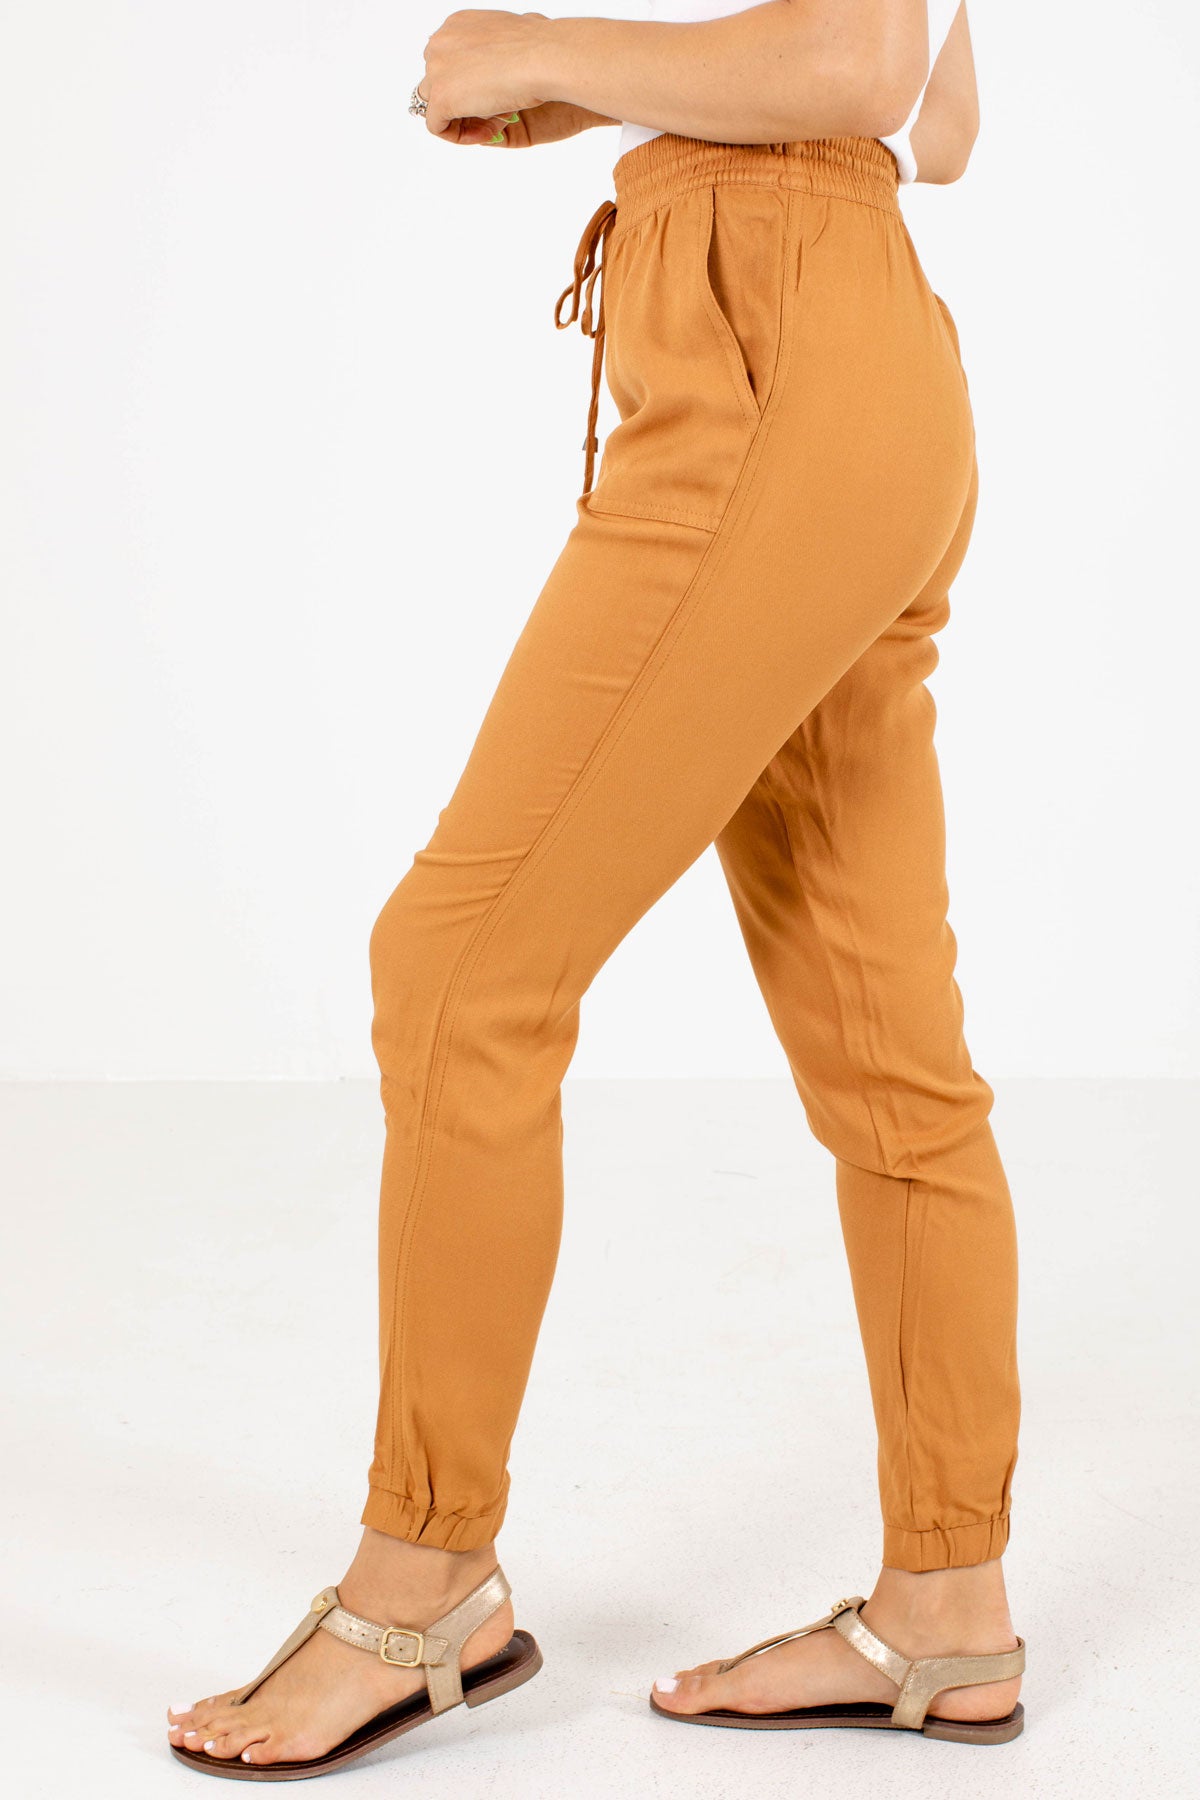 Women's Yellow Boutique Joggers with Pockets